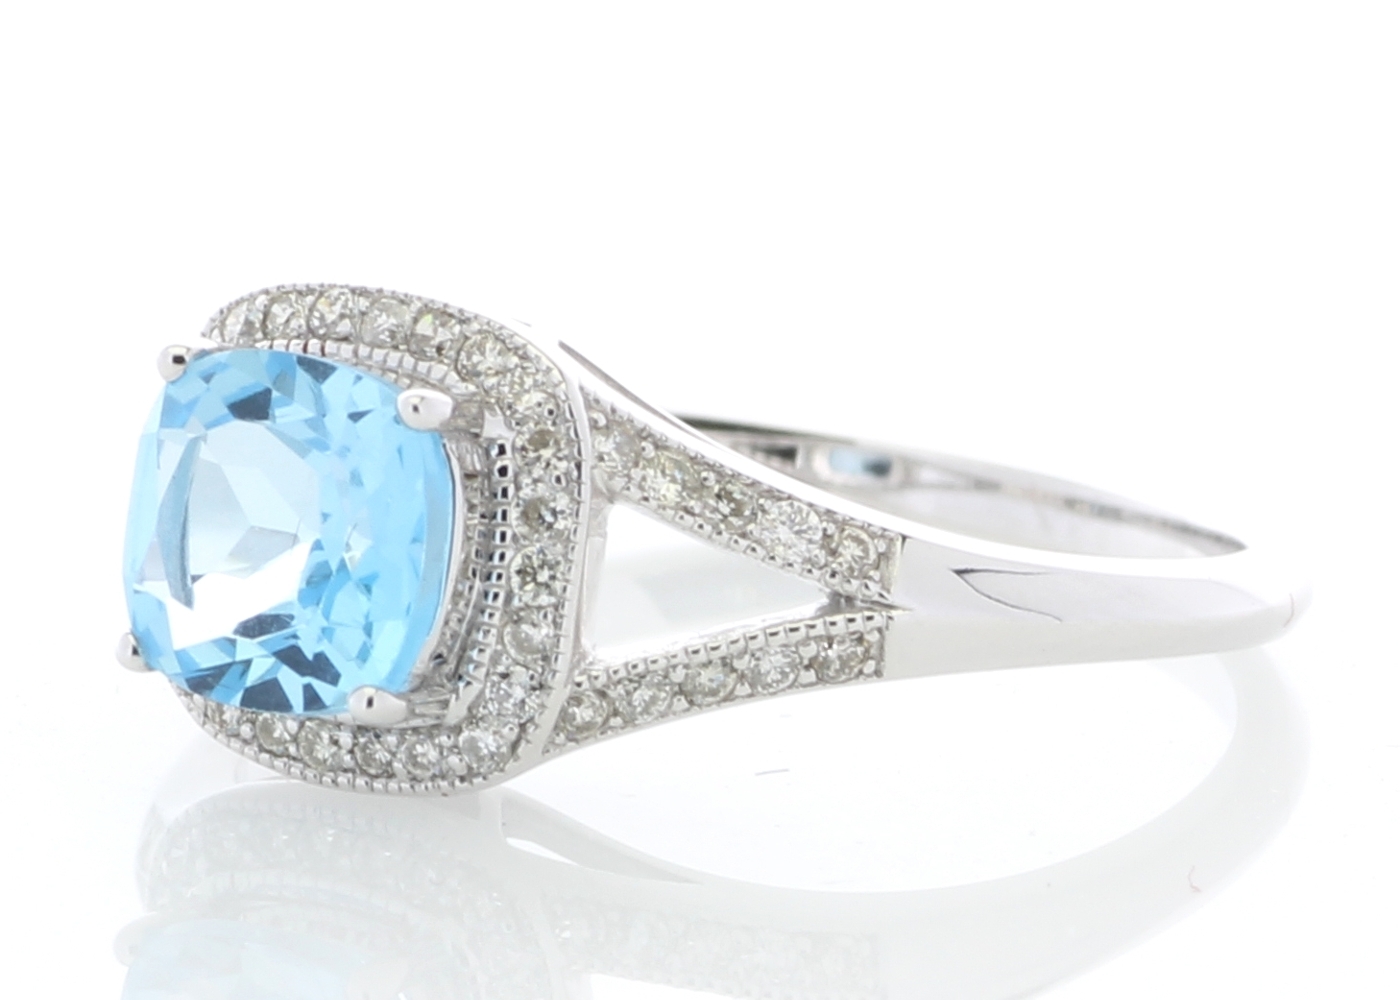 9ct White Gold Blue Topaz And Diamond Ring 0.22 Carats - Image 2 of 5